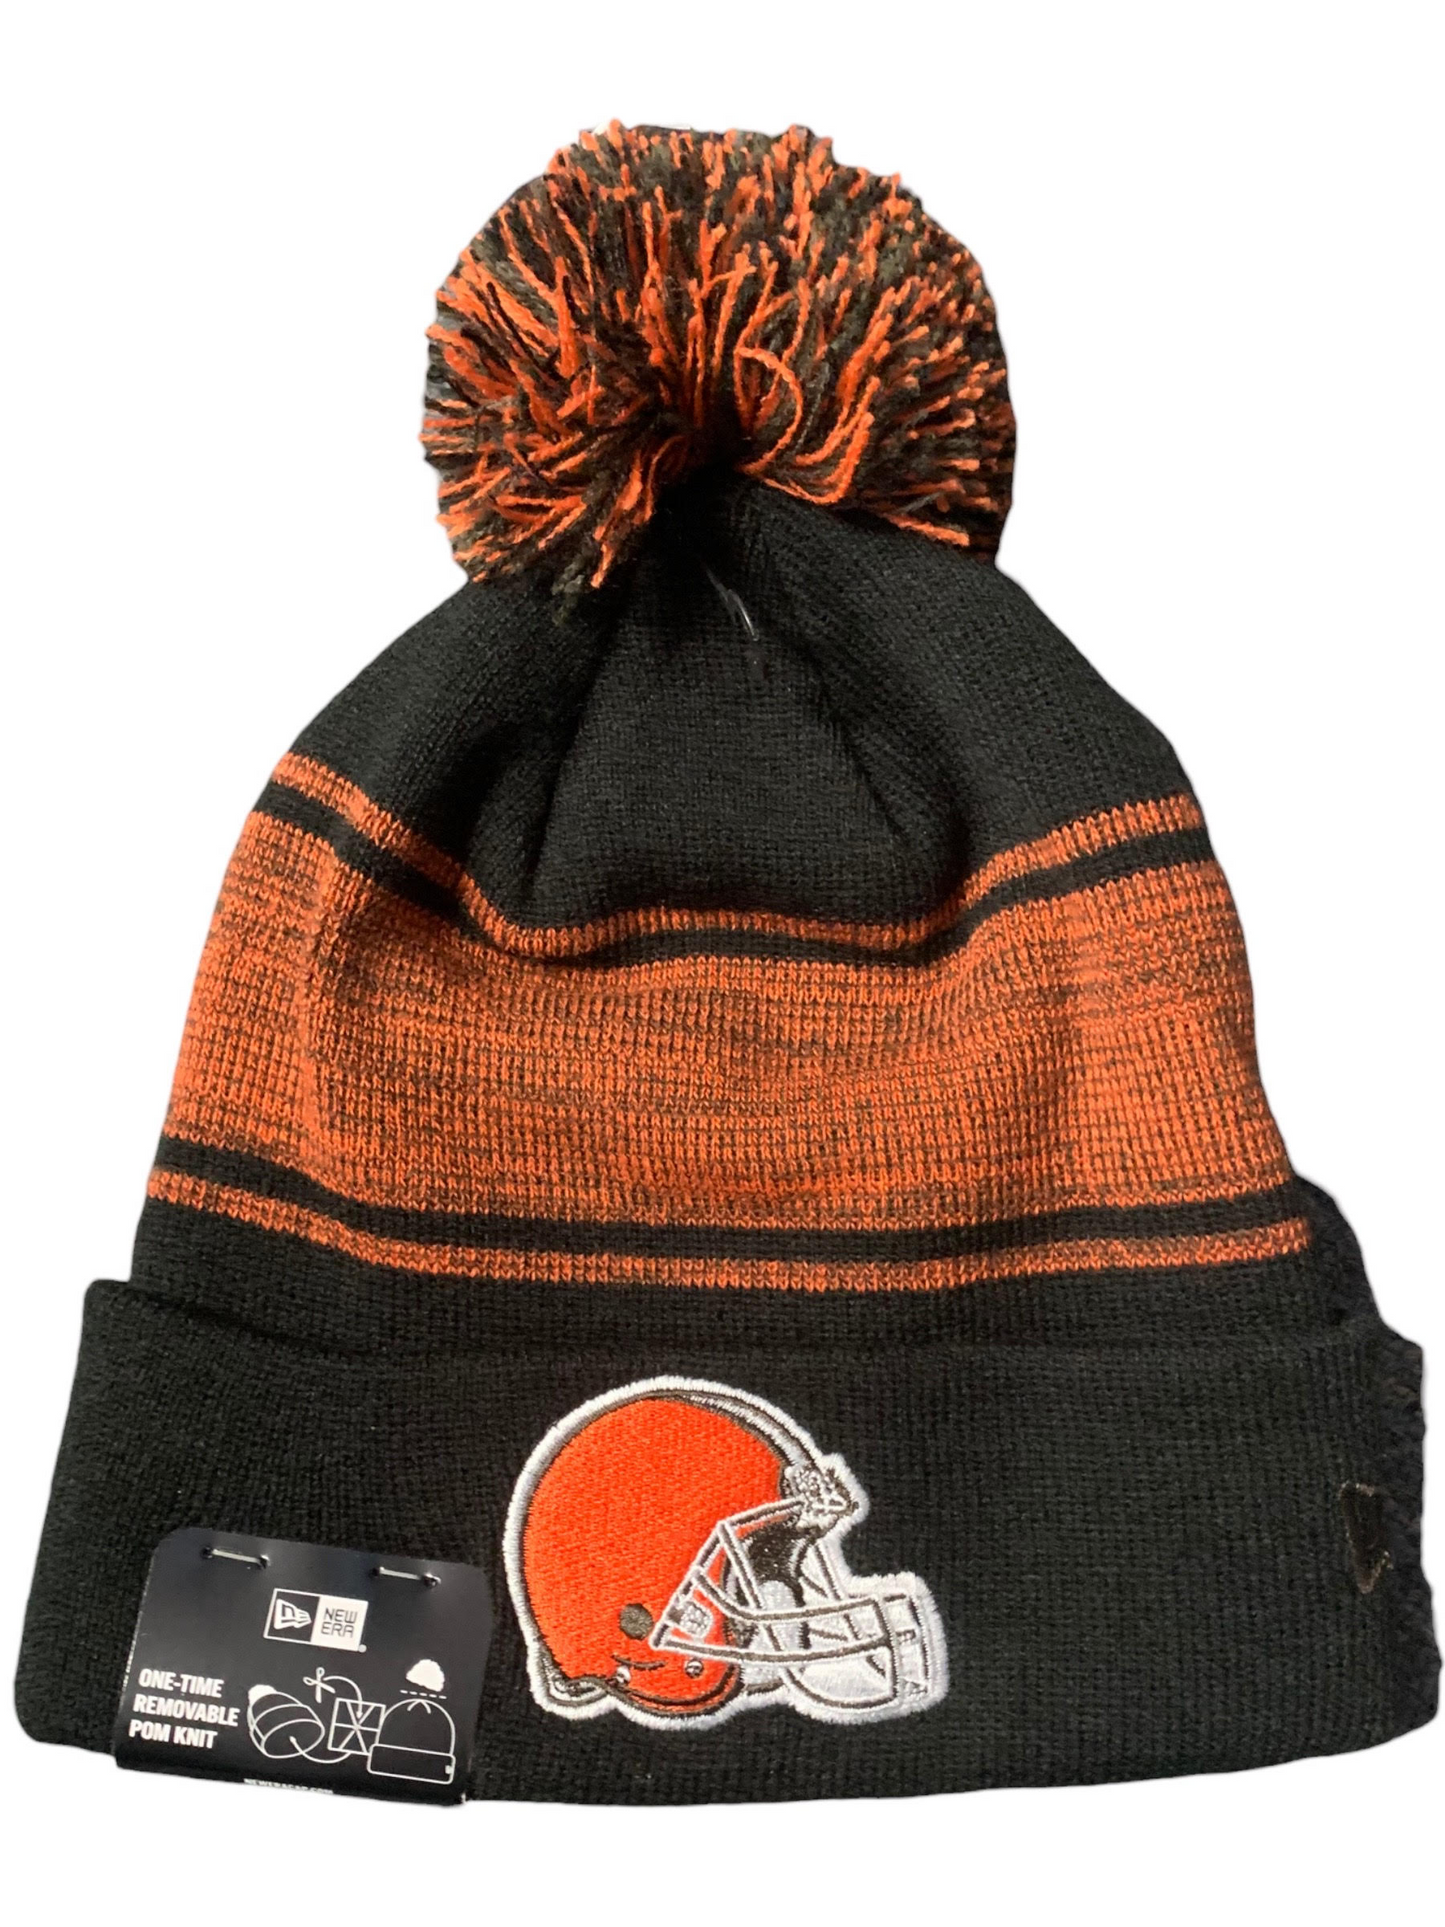 CLEVELAND BROWNS CHILLED KNIT BEANIE